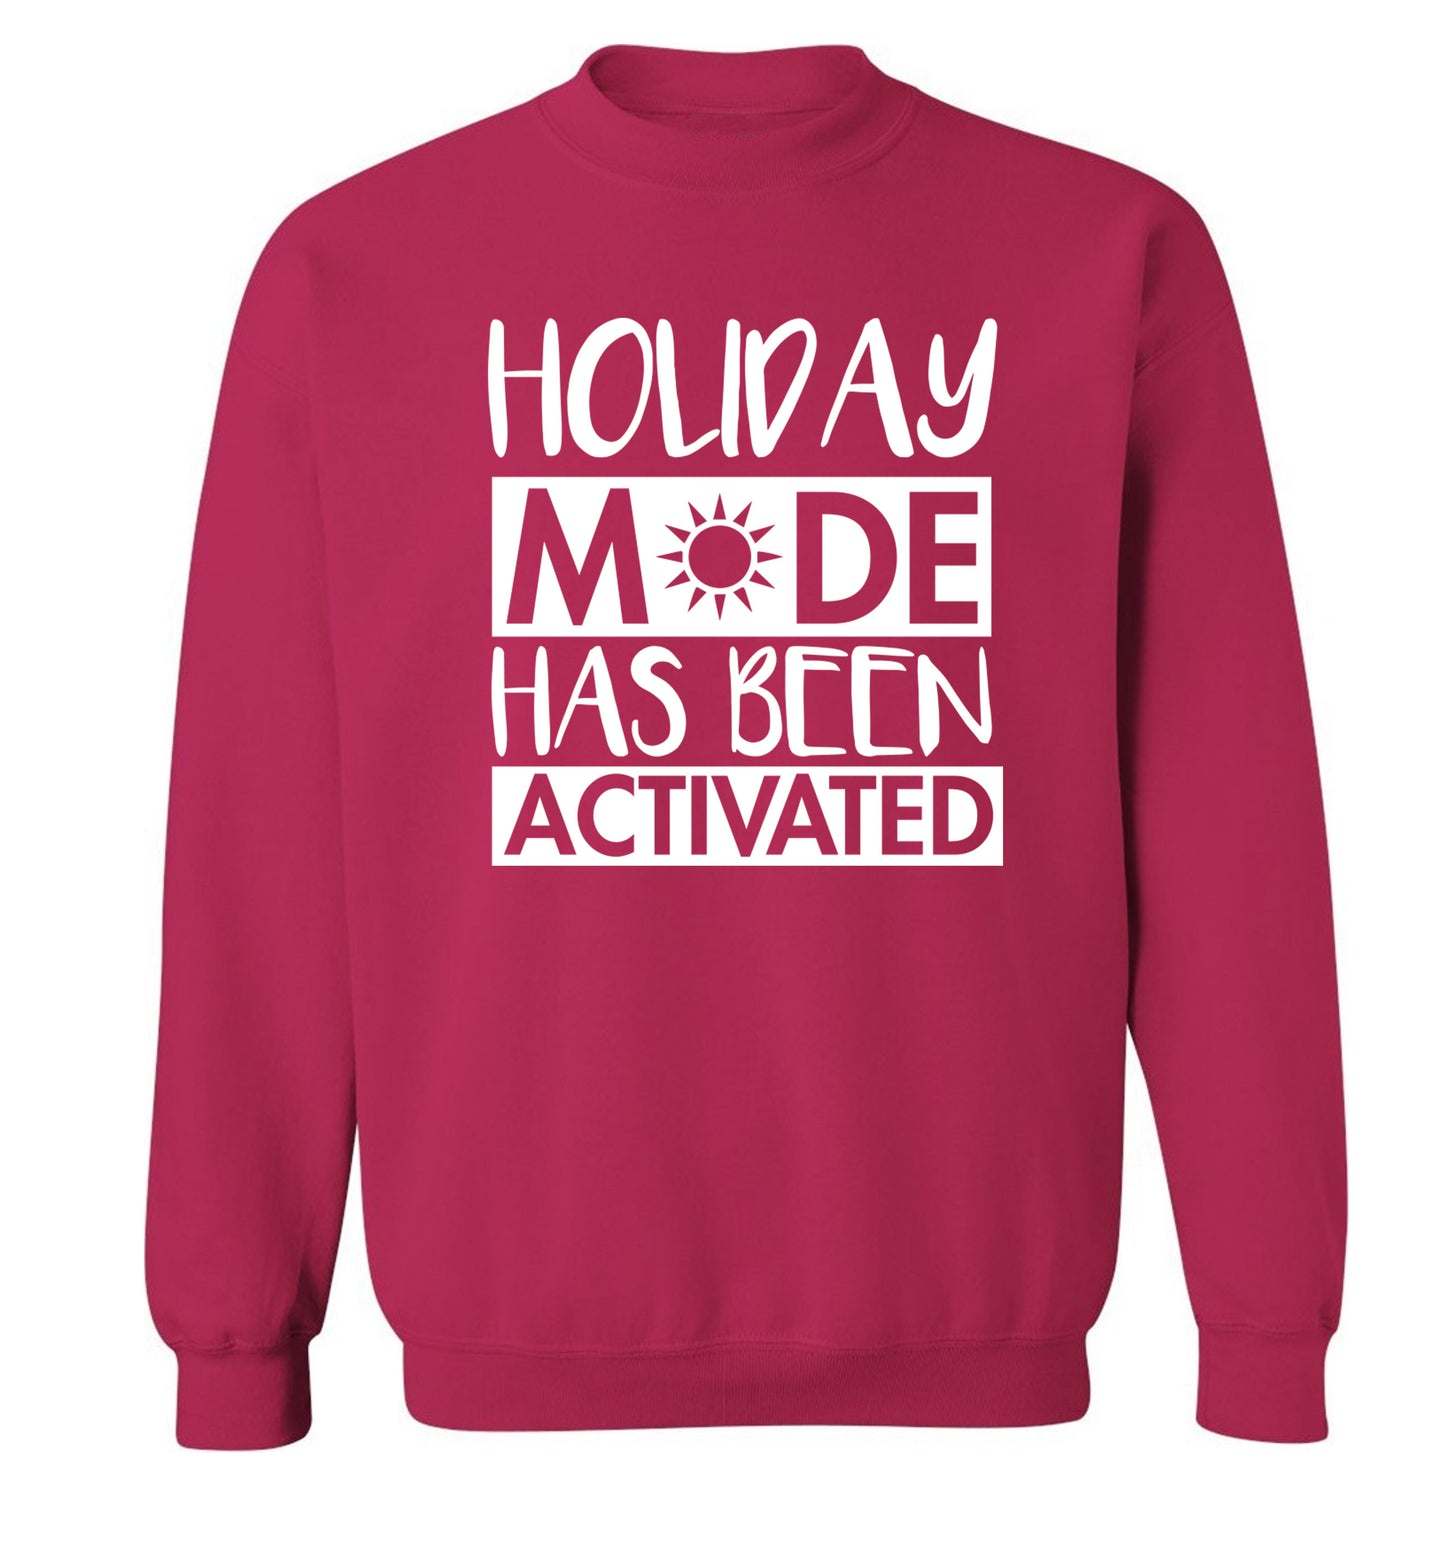 Holiday mode has been activated Adult's unisex pink Sweater 2XL